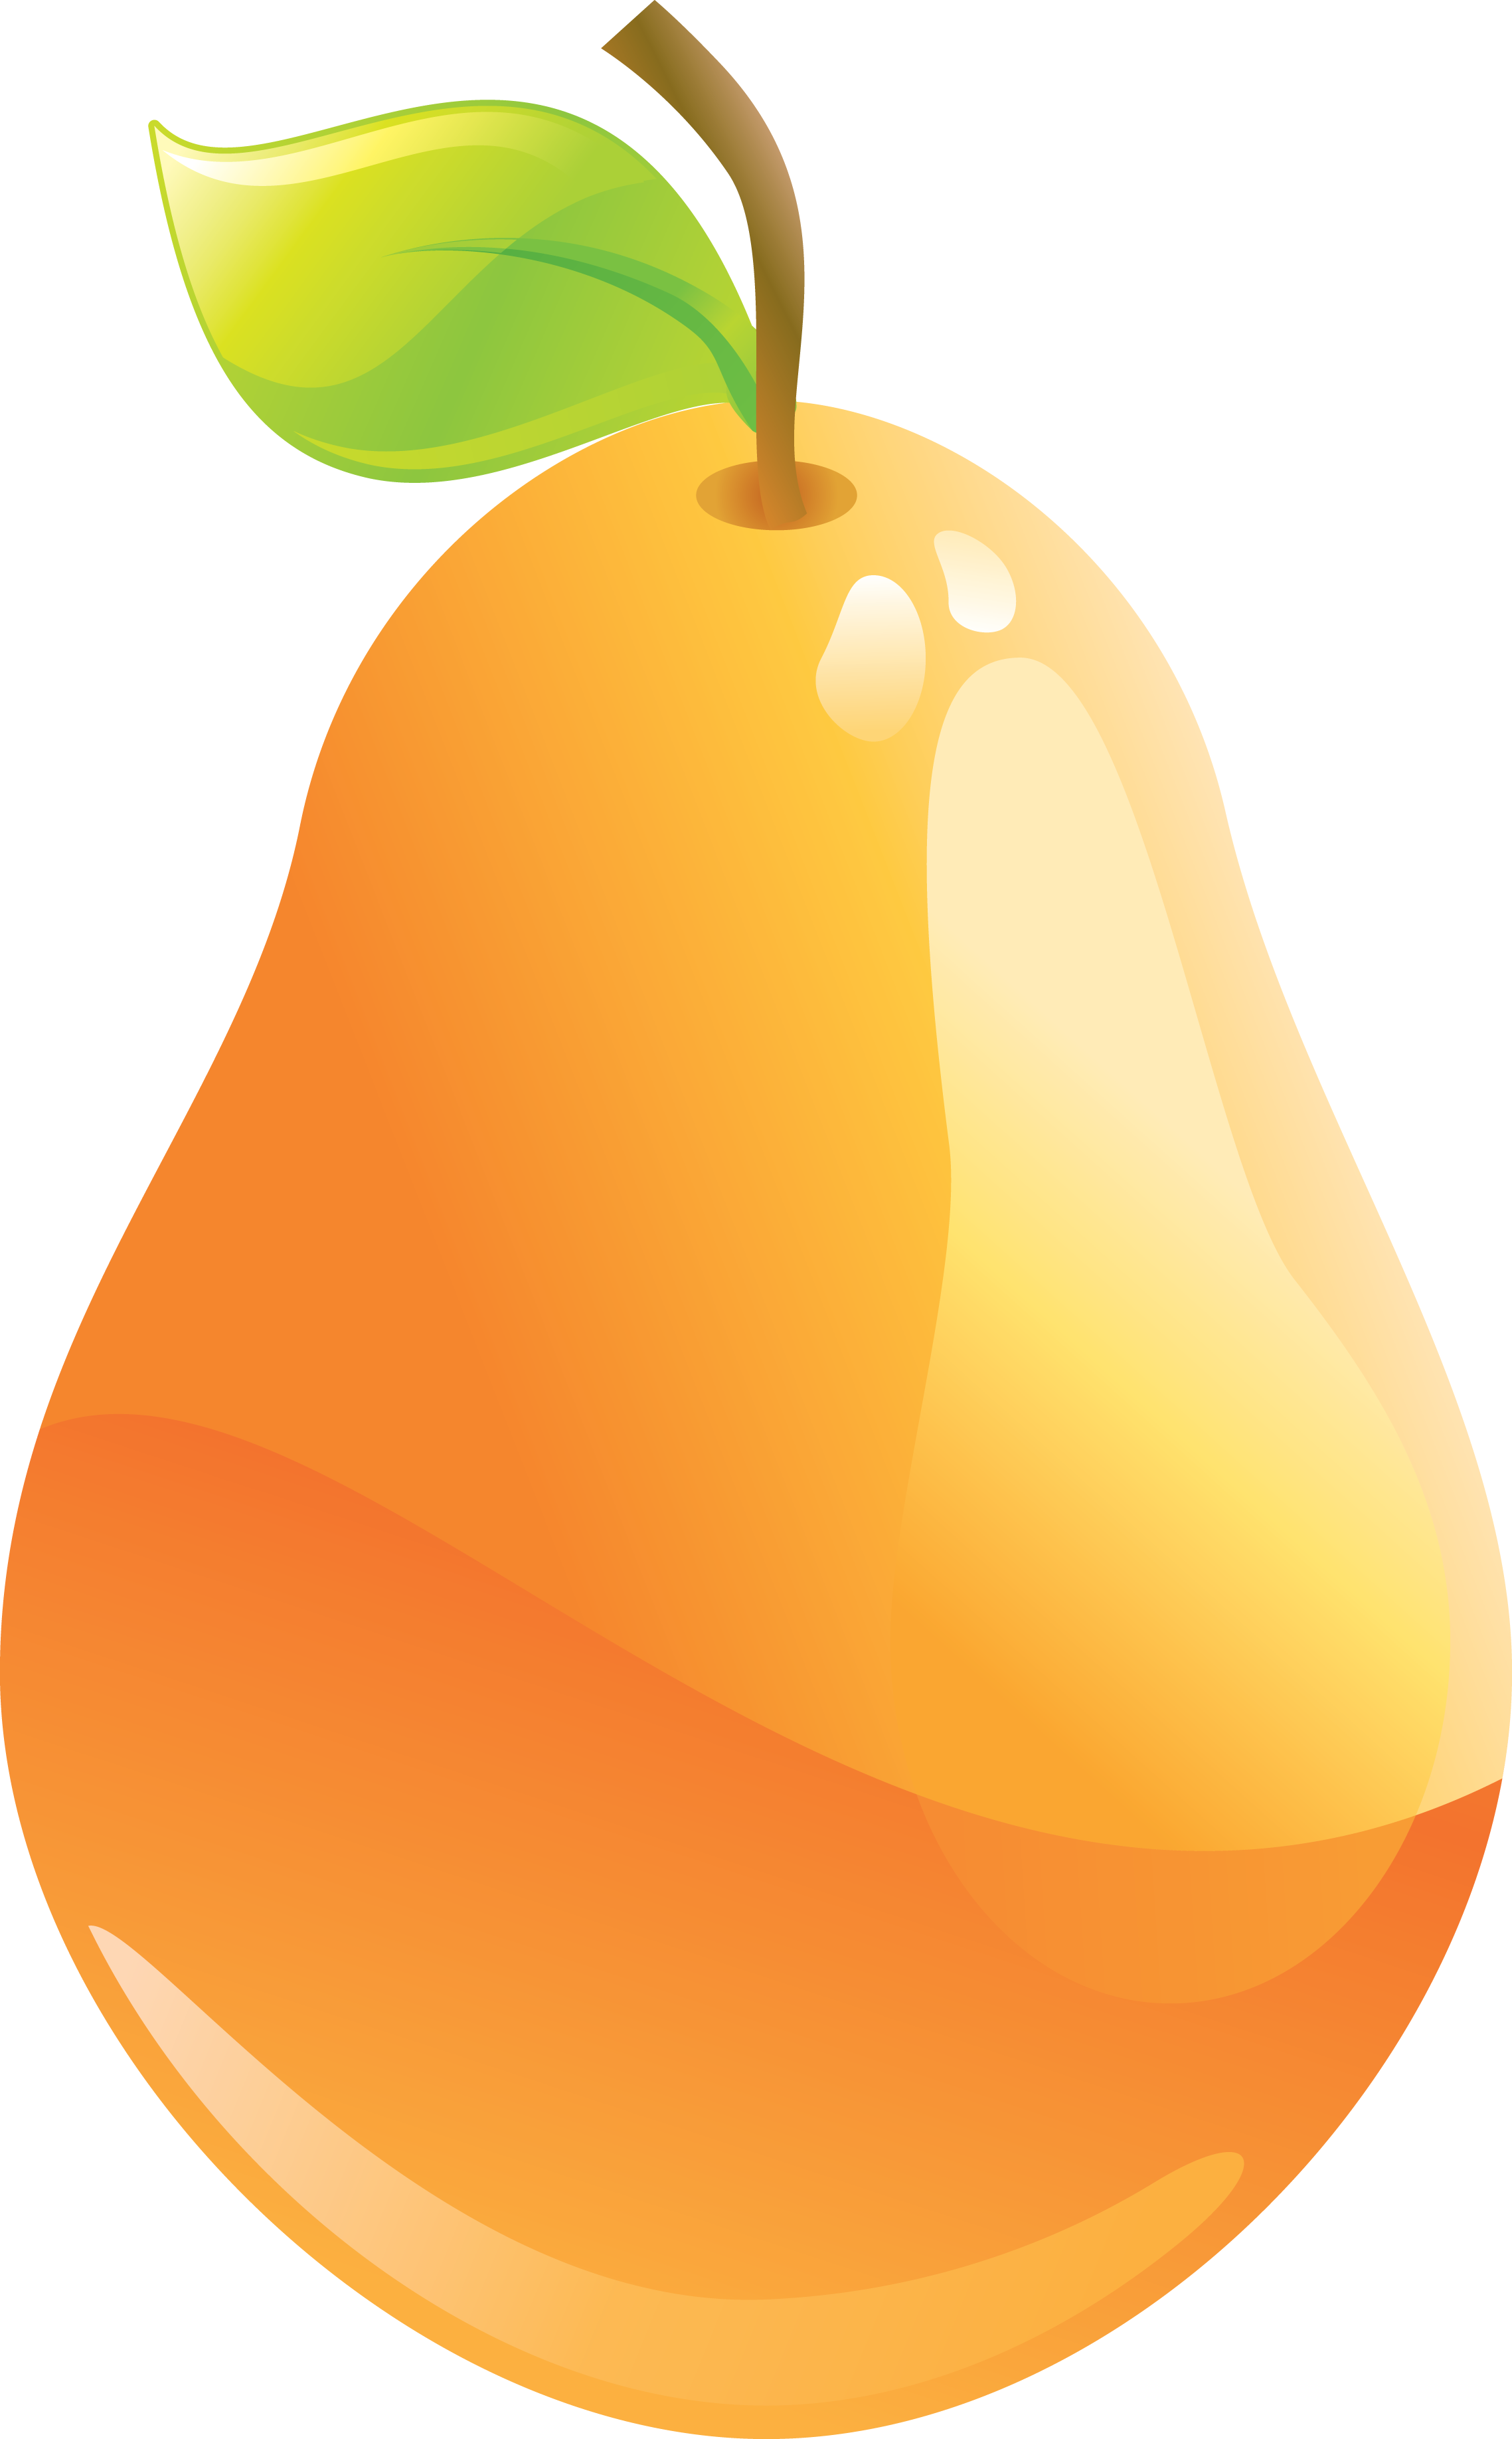 Pears PNG Image